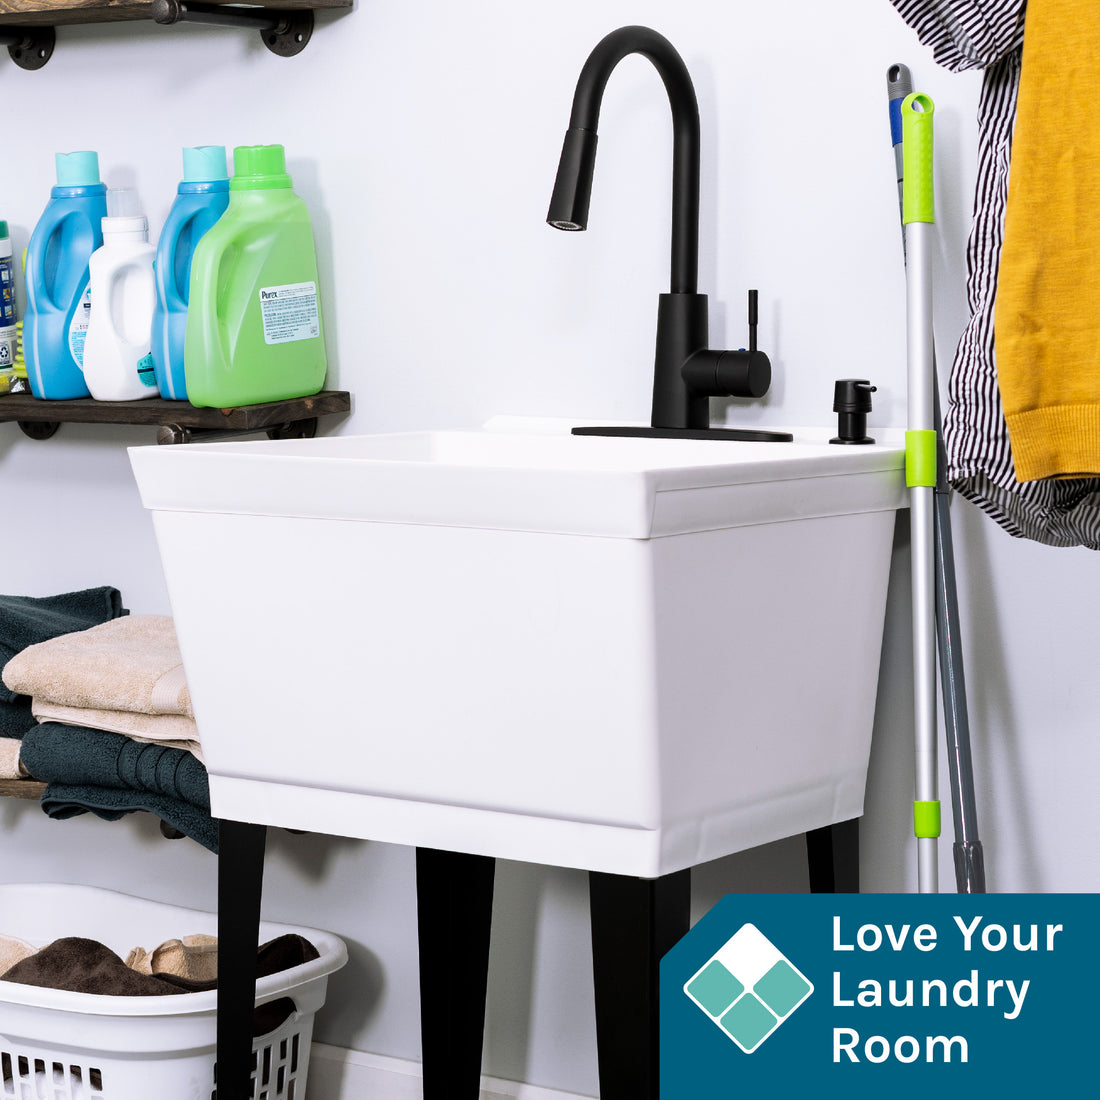 Different Uses for Laundry Room Sinks ⋆ C&W Appliance Service